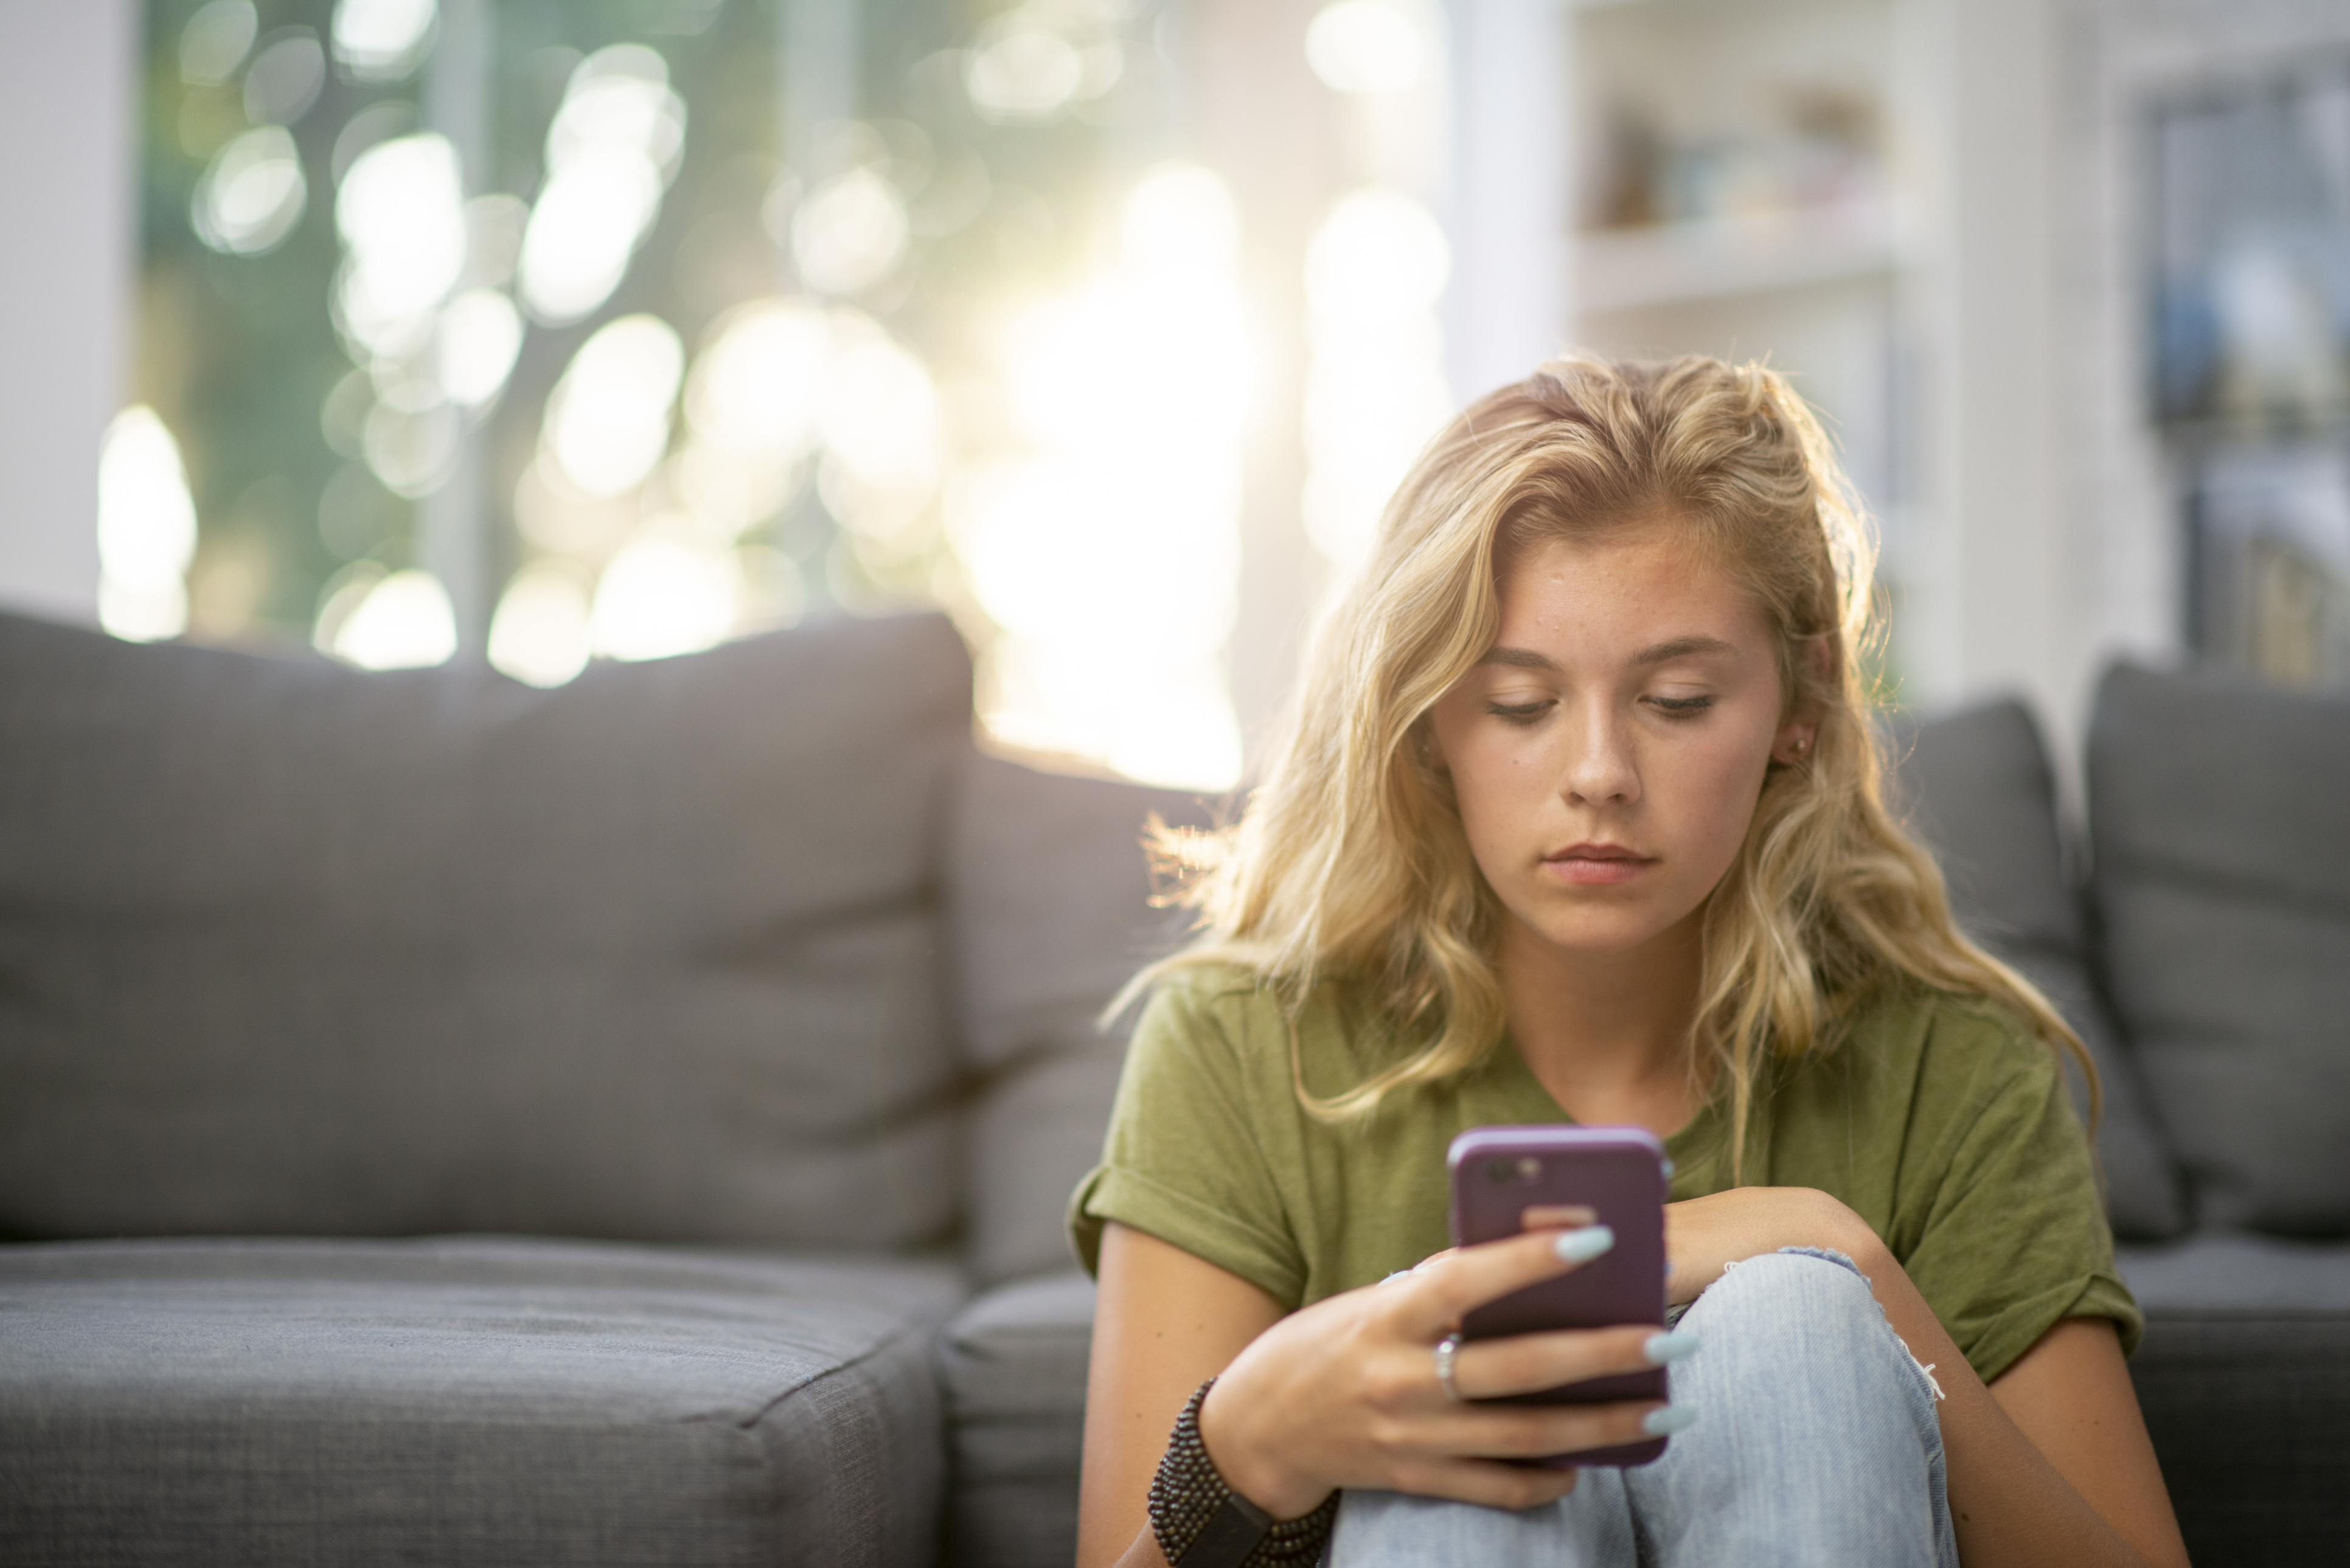 Is It A Good Thing To Keep Texting After A First Date Or Annoying? How To Not Appear Too Needy Or Too Eager?